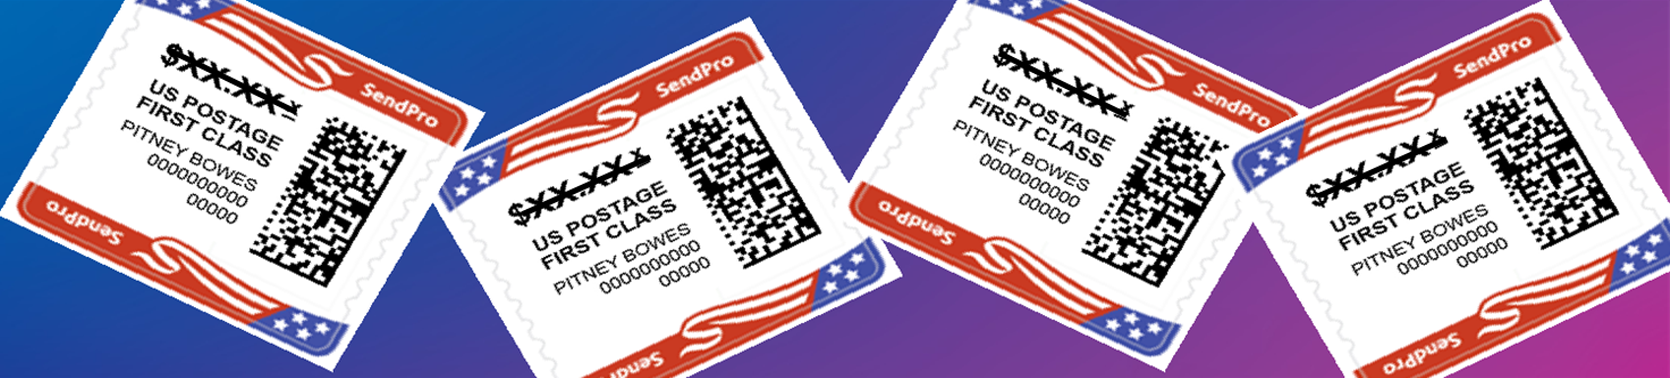 Print USPS® stamps with the SendPro®/PitneyShip™ solution | Pitney Bowes